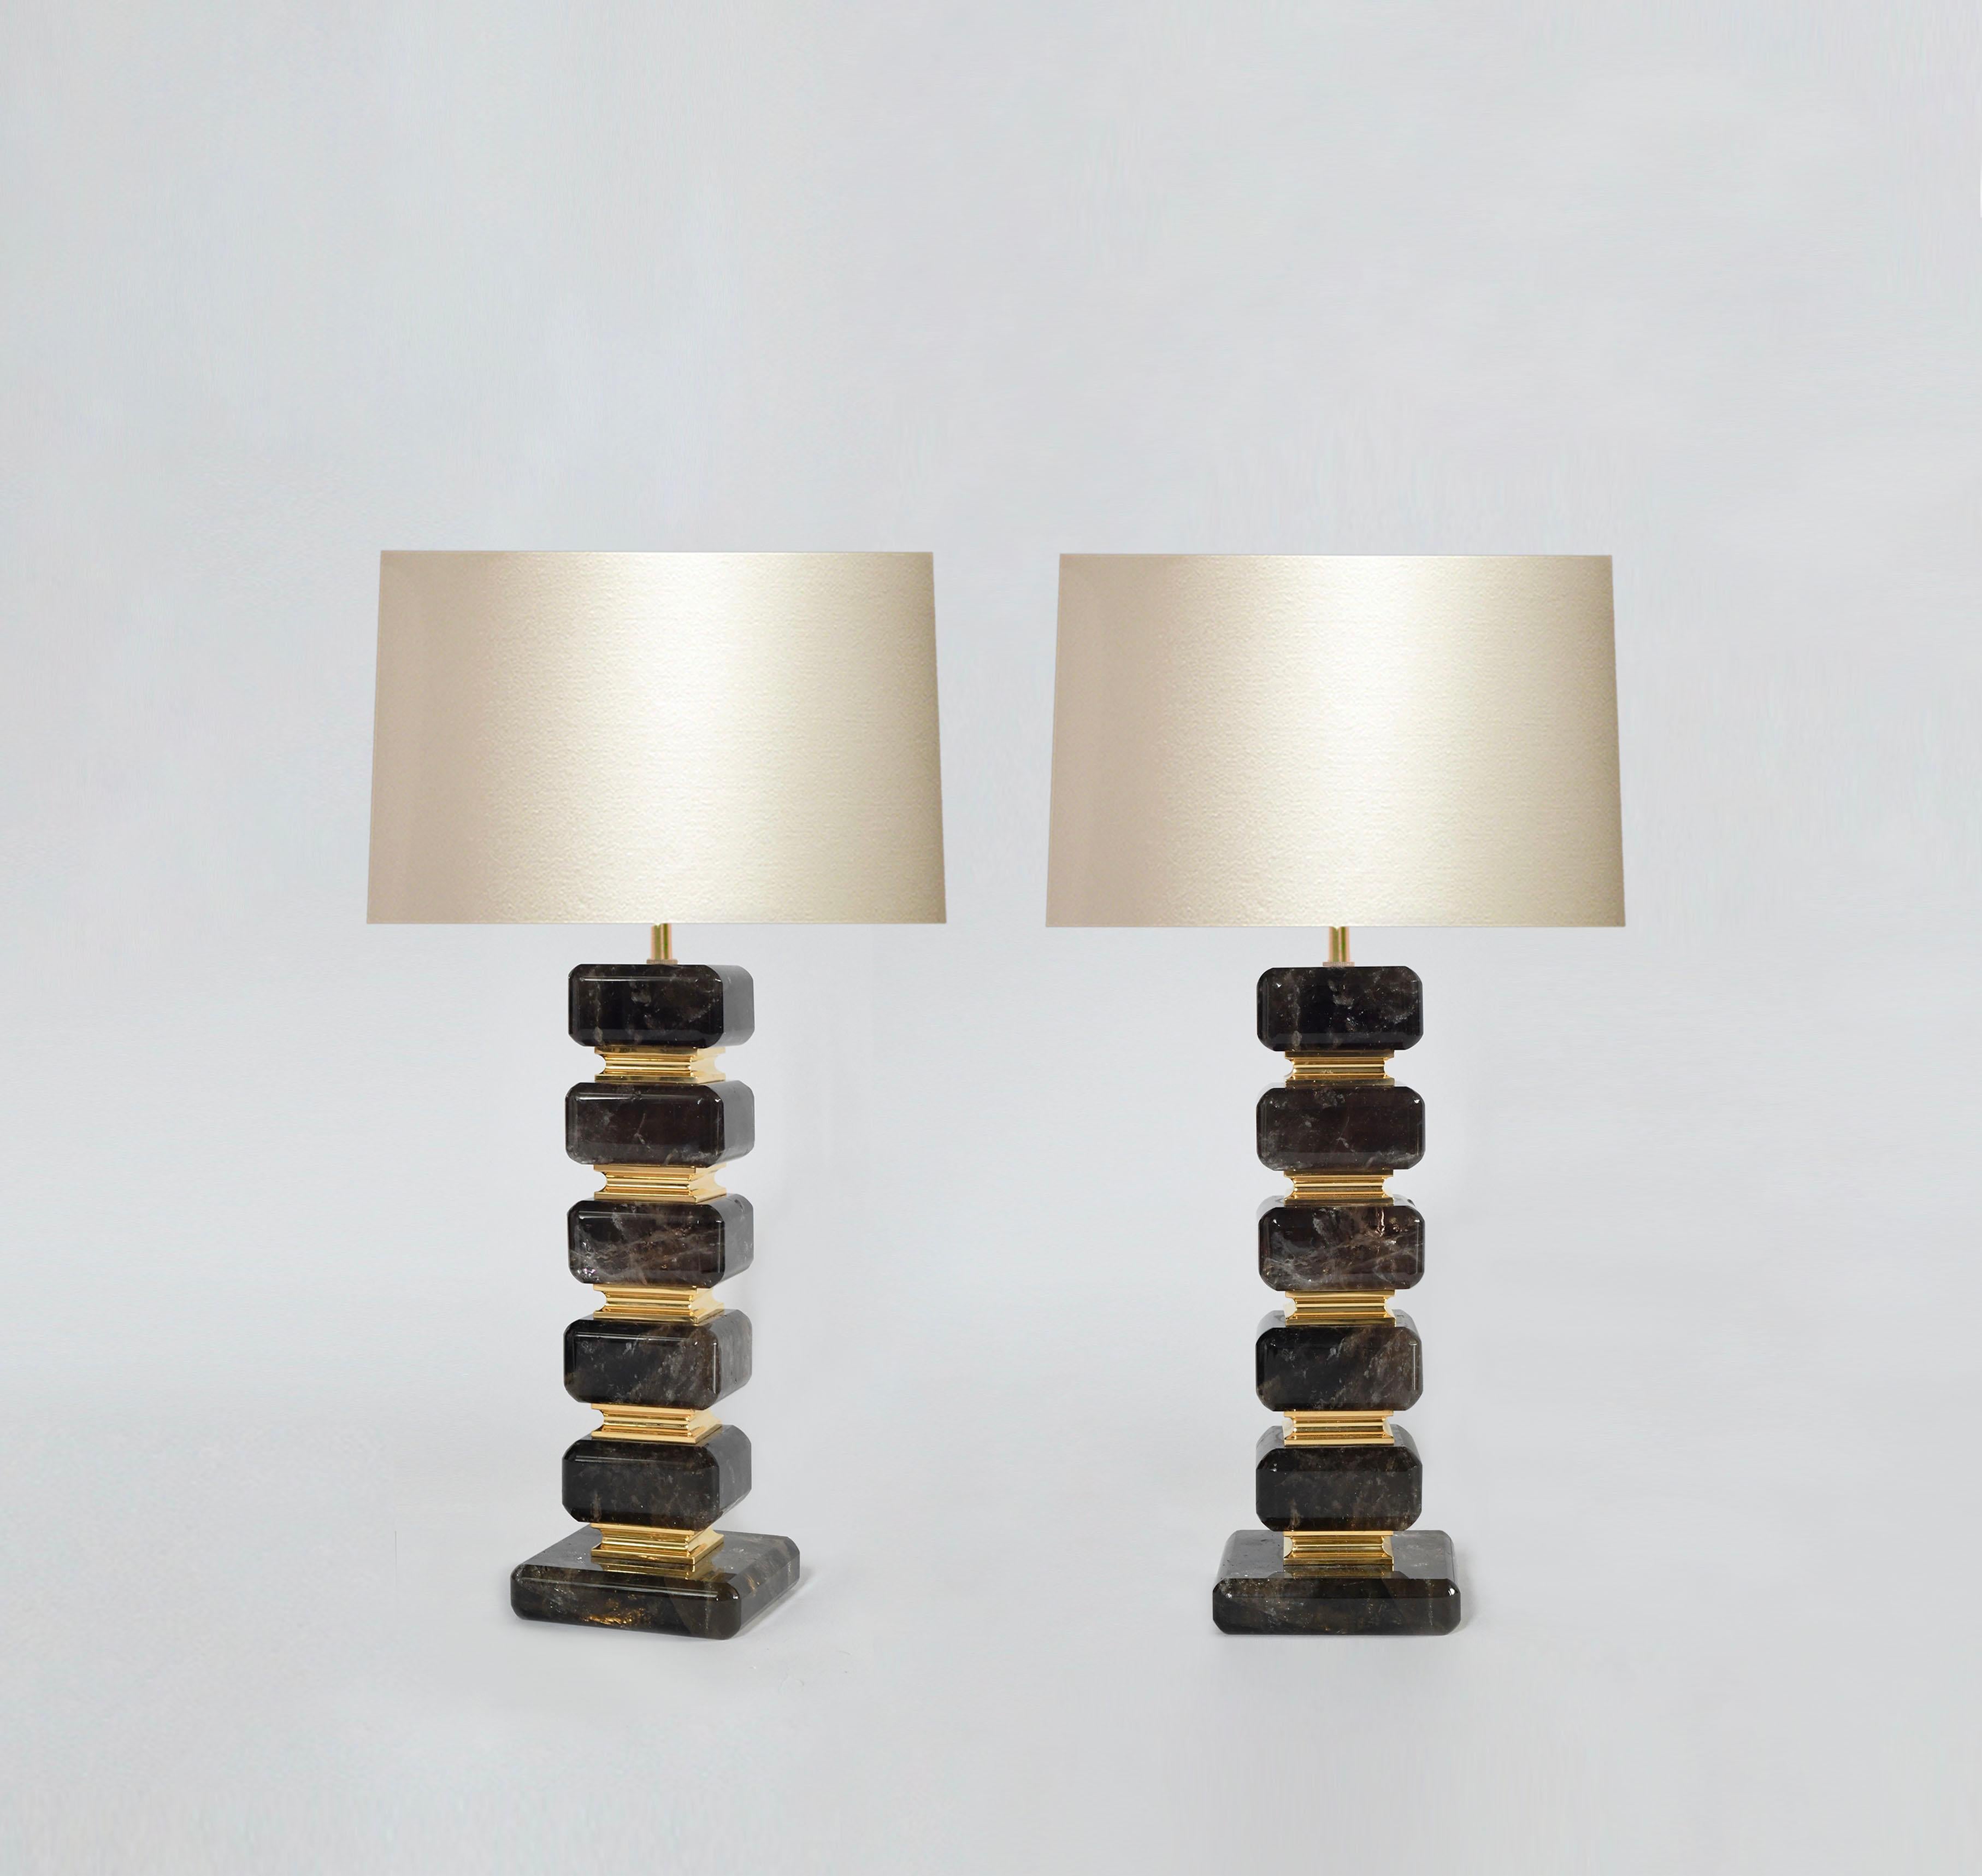 Cubic with beveled edge smoky rock crystal table lamps with brass insert decoration. Created by Phoenix Gallery, NYC.
To the top of rock crystal: 14 in / H
Total height with shade: 27 in / H
( lampshades do not include).